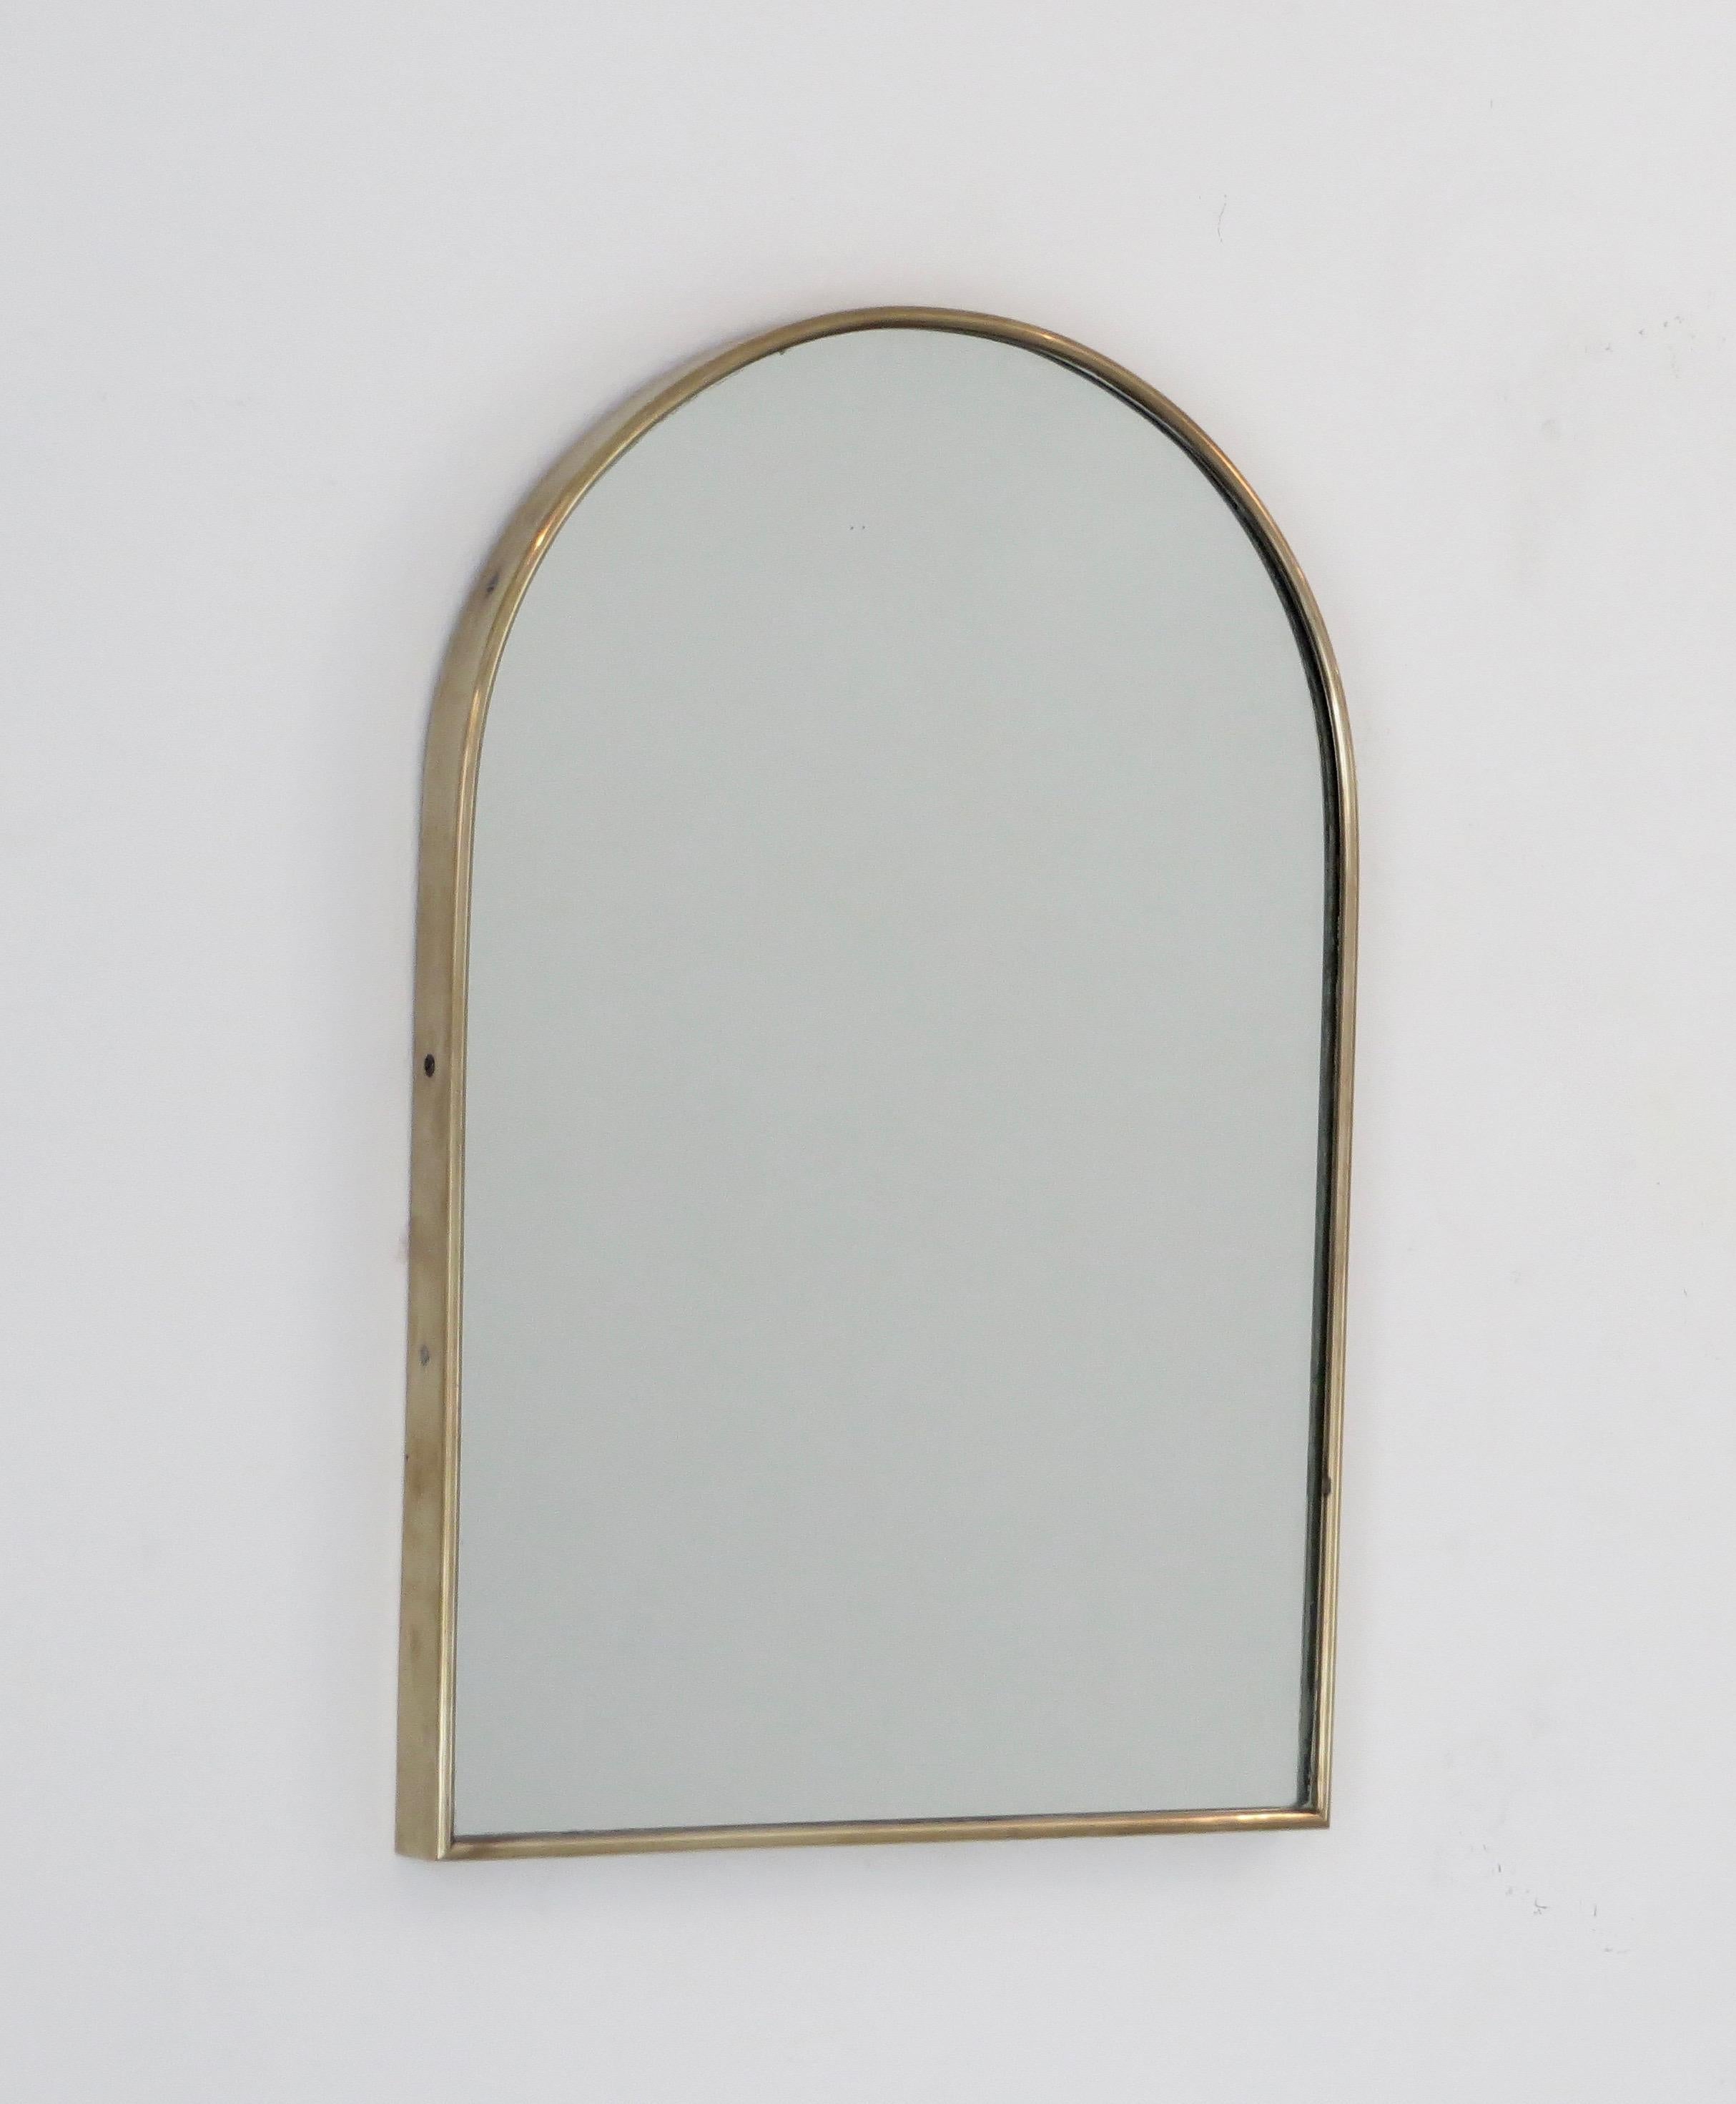 Italian vintage rounded top petit Italian brass framed wall mirror.
Wood backing with hook for hanging.
Patina is original but can be highly polished upon request.